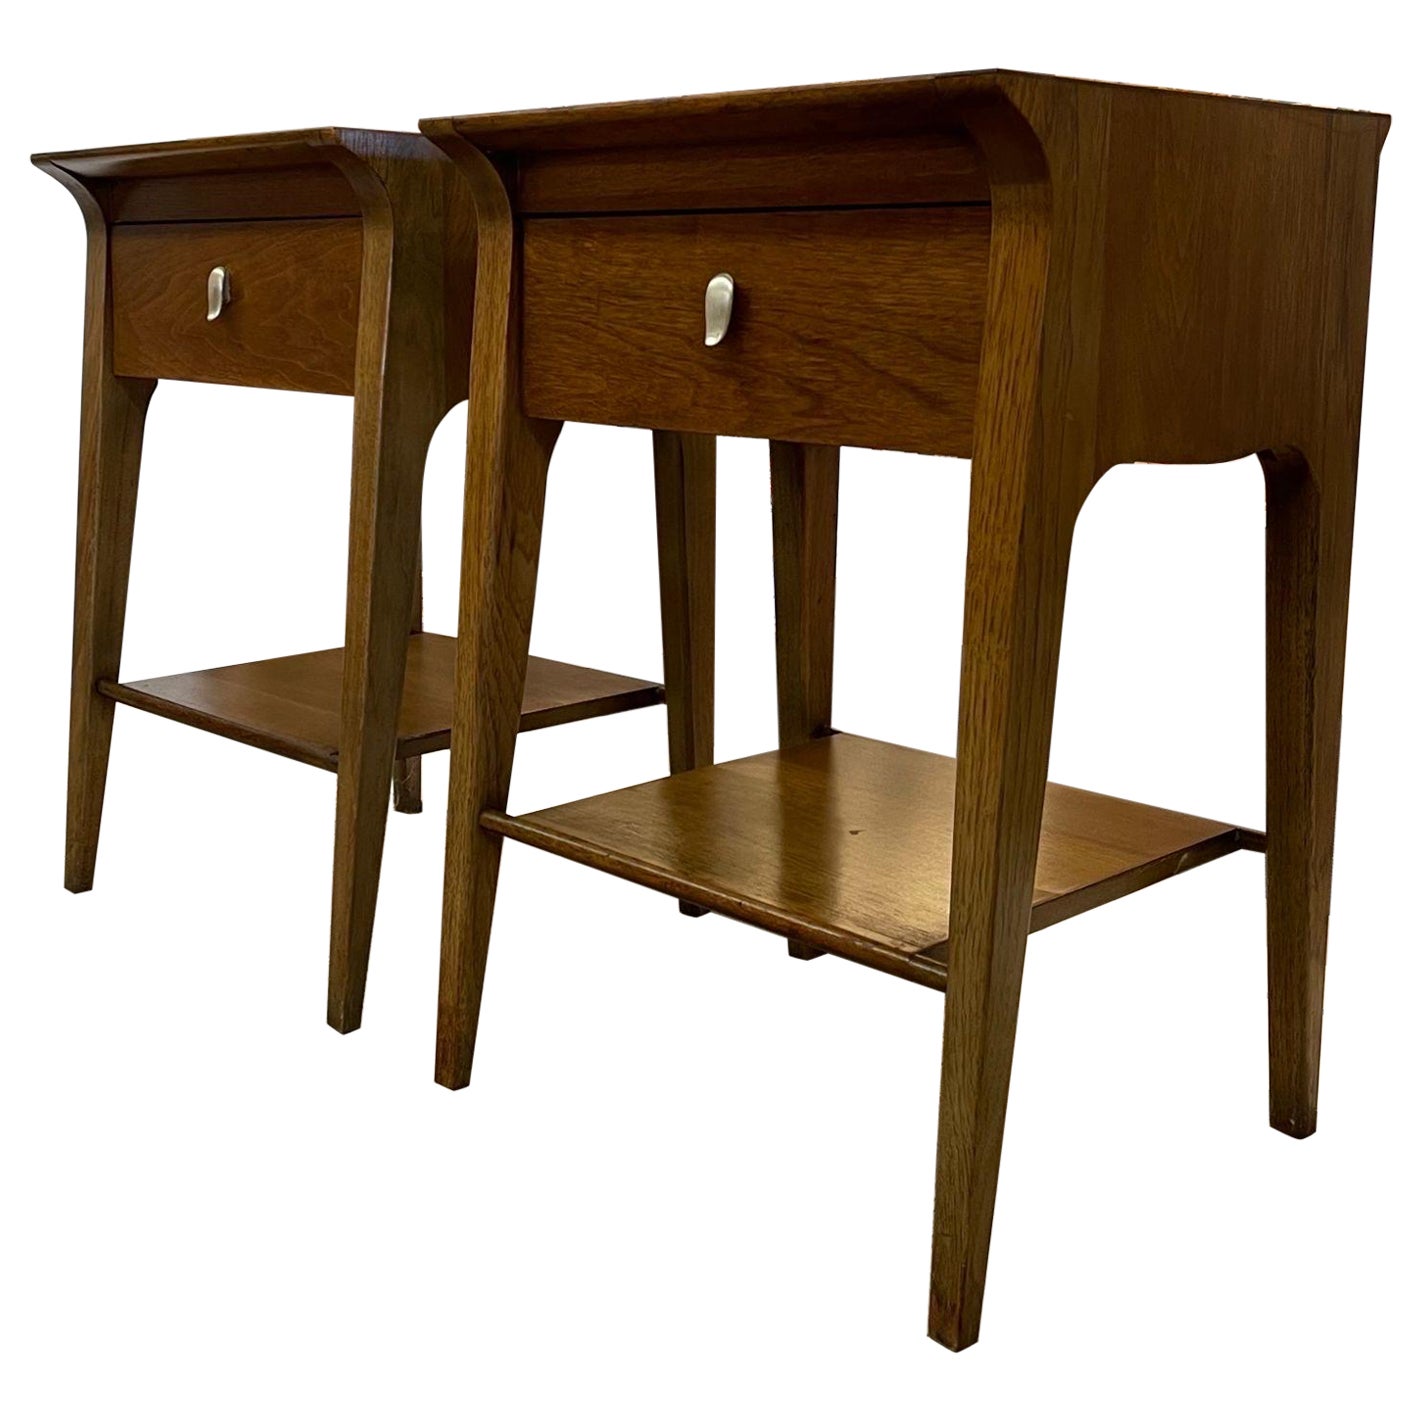 Pair of Vintage Mid Century Modern End Tables by Drexel Profile With John Van For Sale